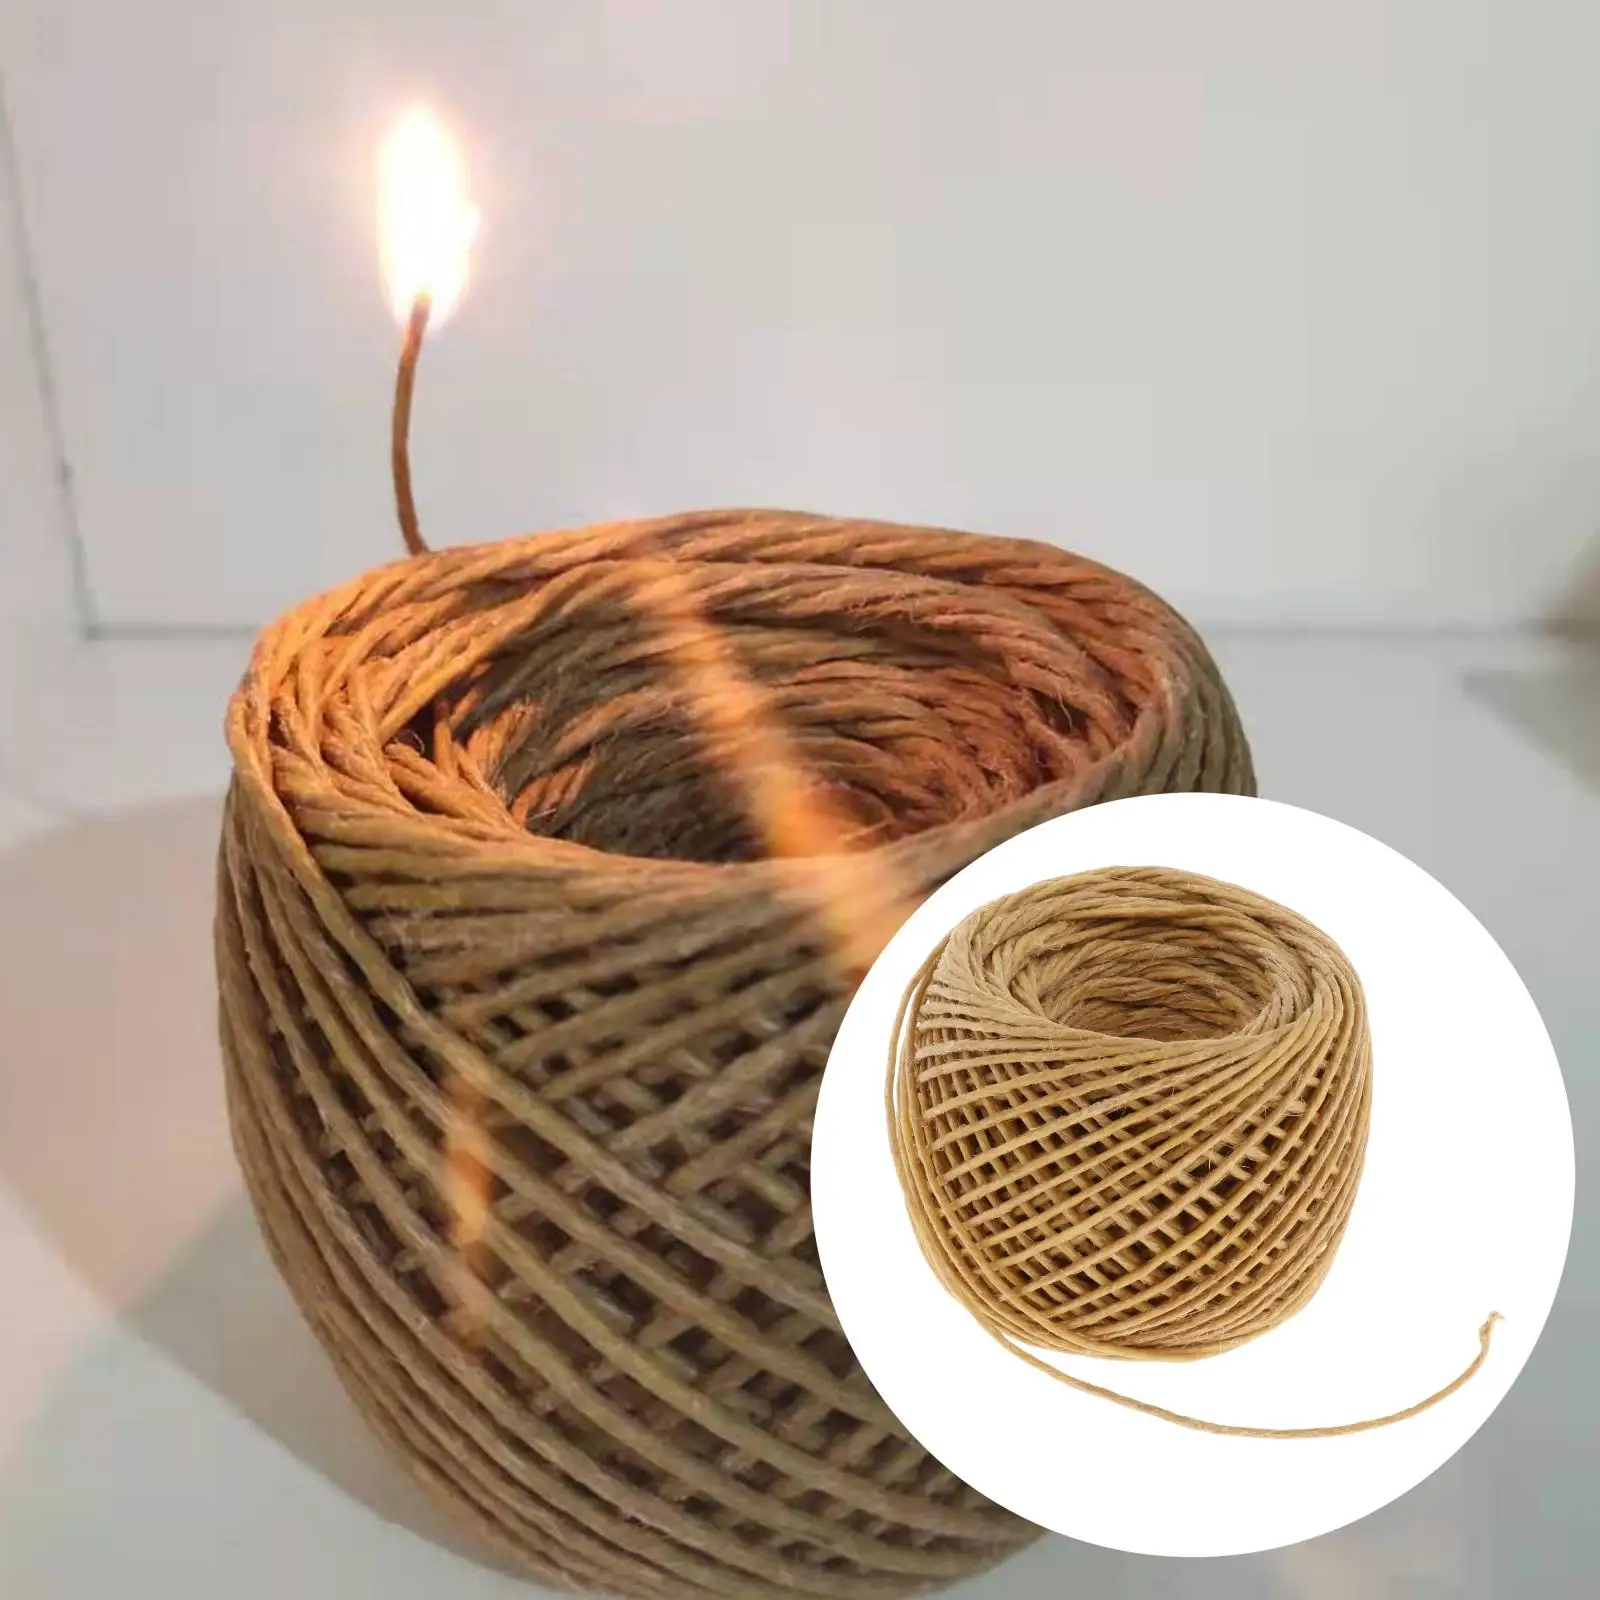 61m Premium Hempwick Candle Wick Lighter 2mm Handmade Natural with Beeswax Coating Organic Candle Making Craft Rope